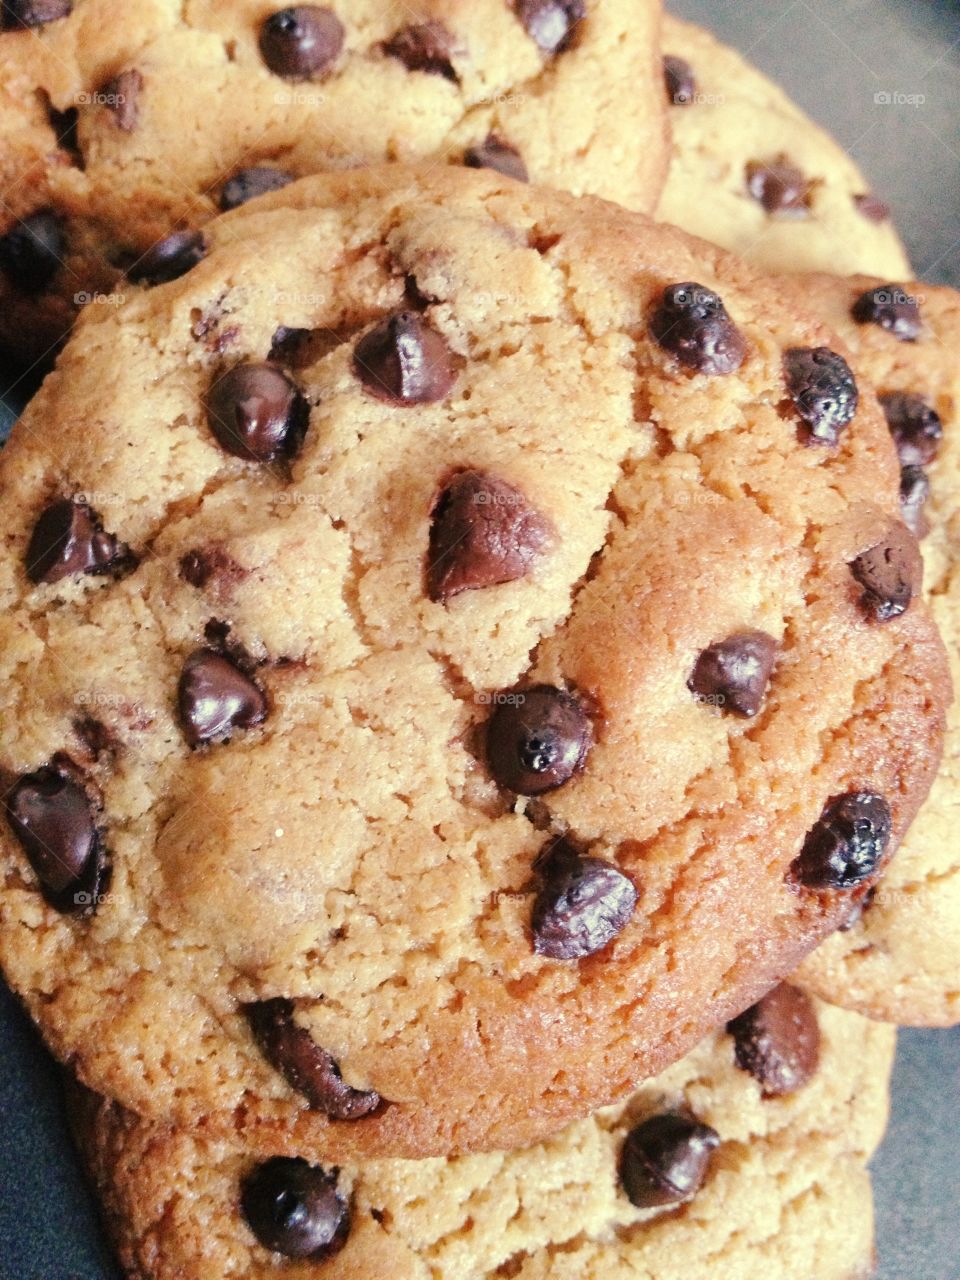 Chocolate chip cookies. Chocolate chip cookie is my favorite